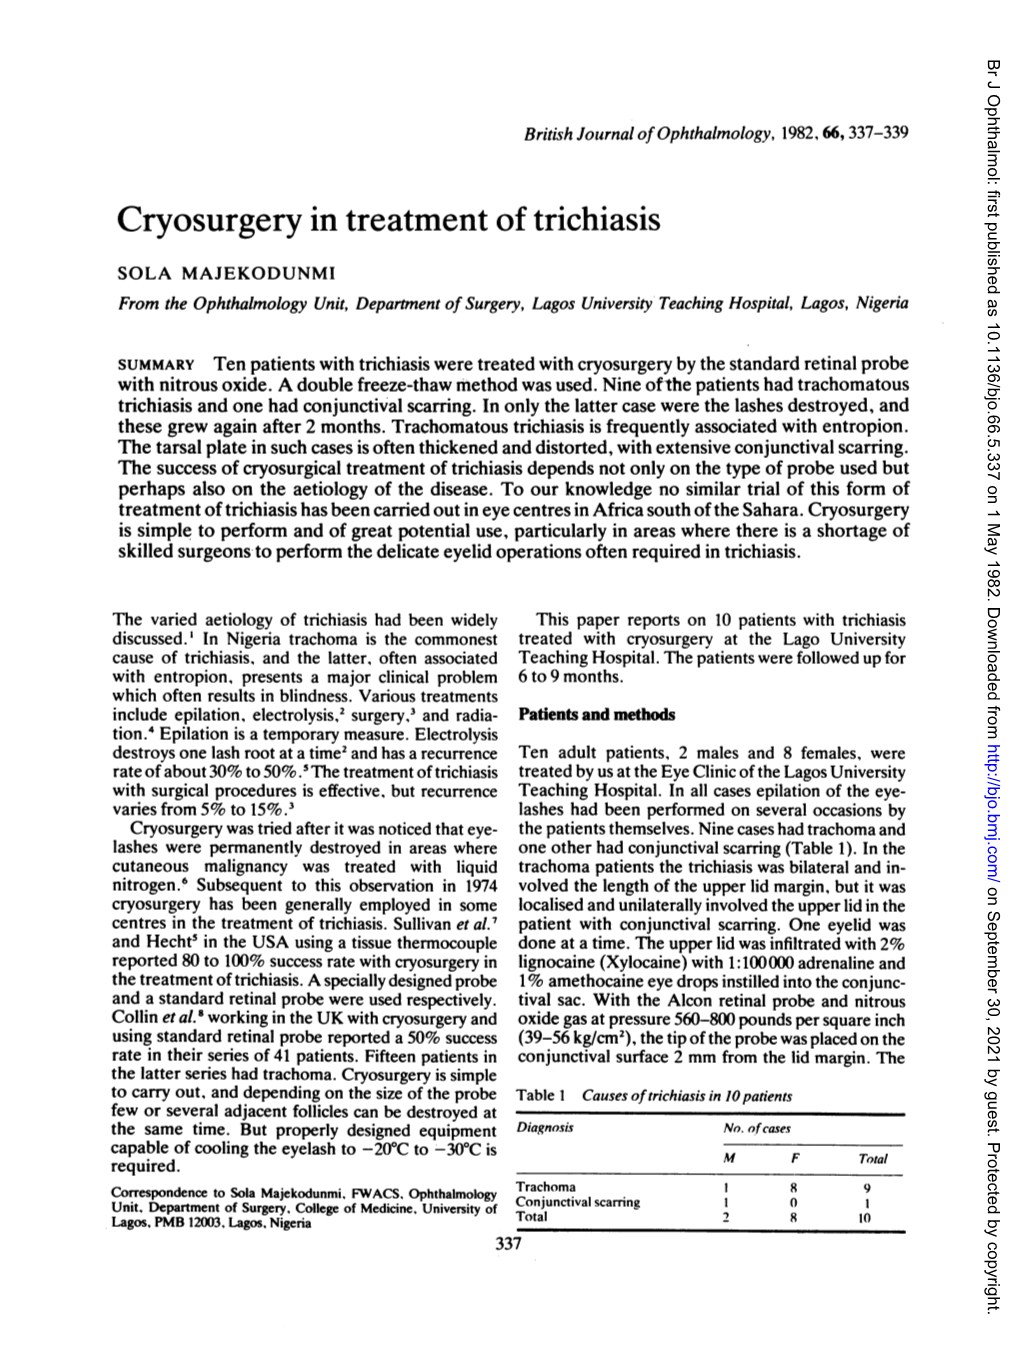 Cryosurgery in Treatment of Trichiasis